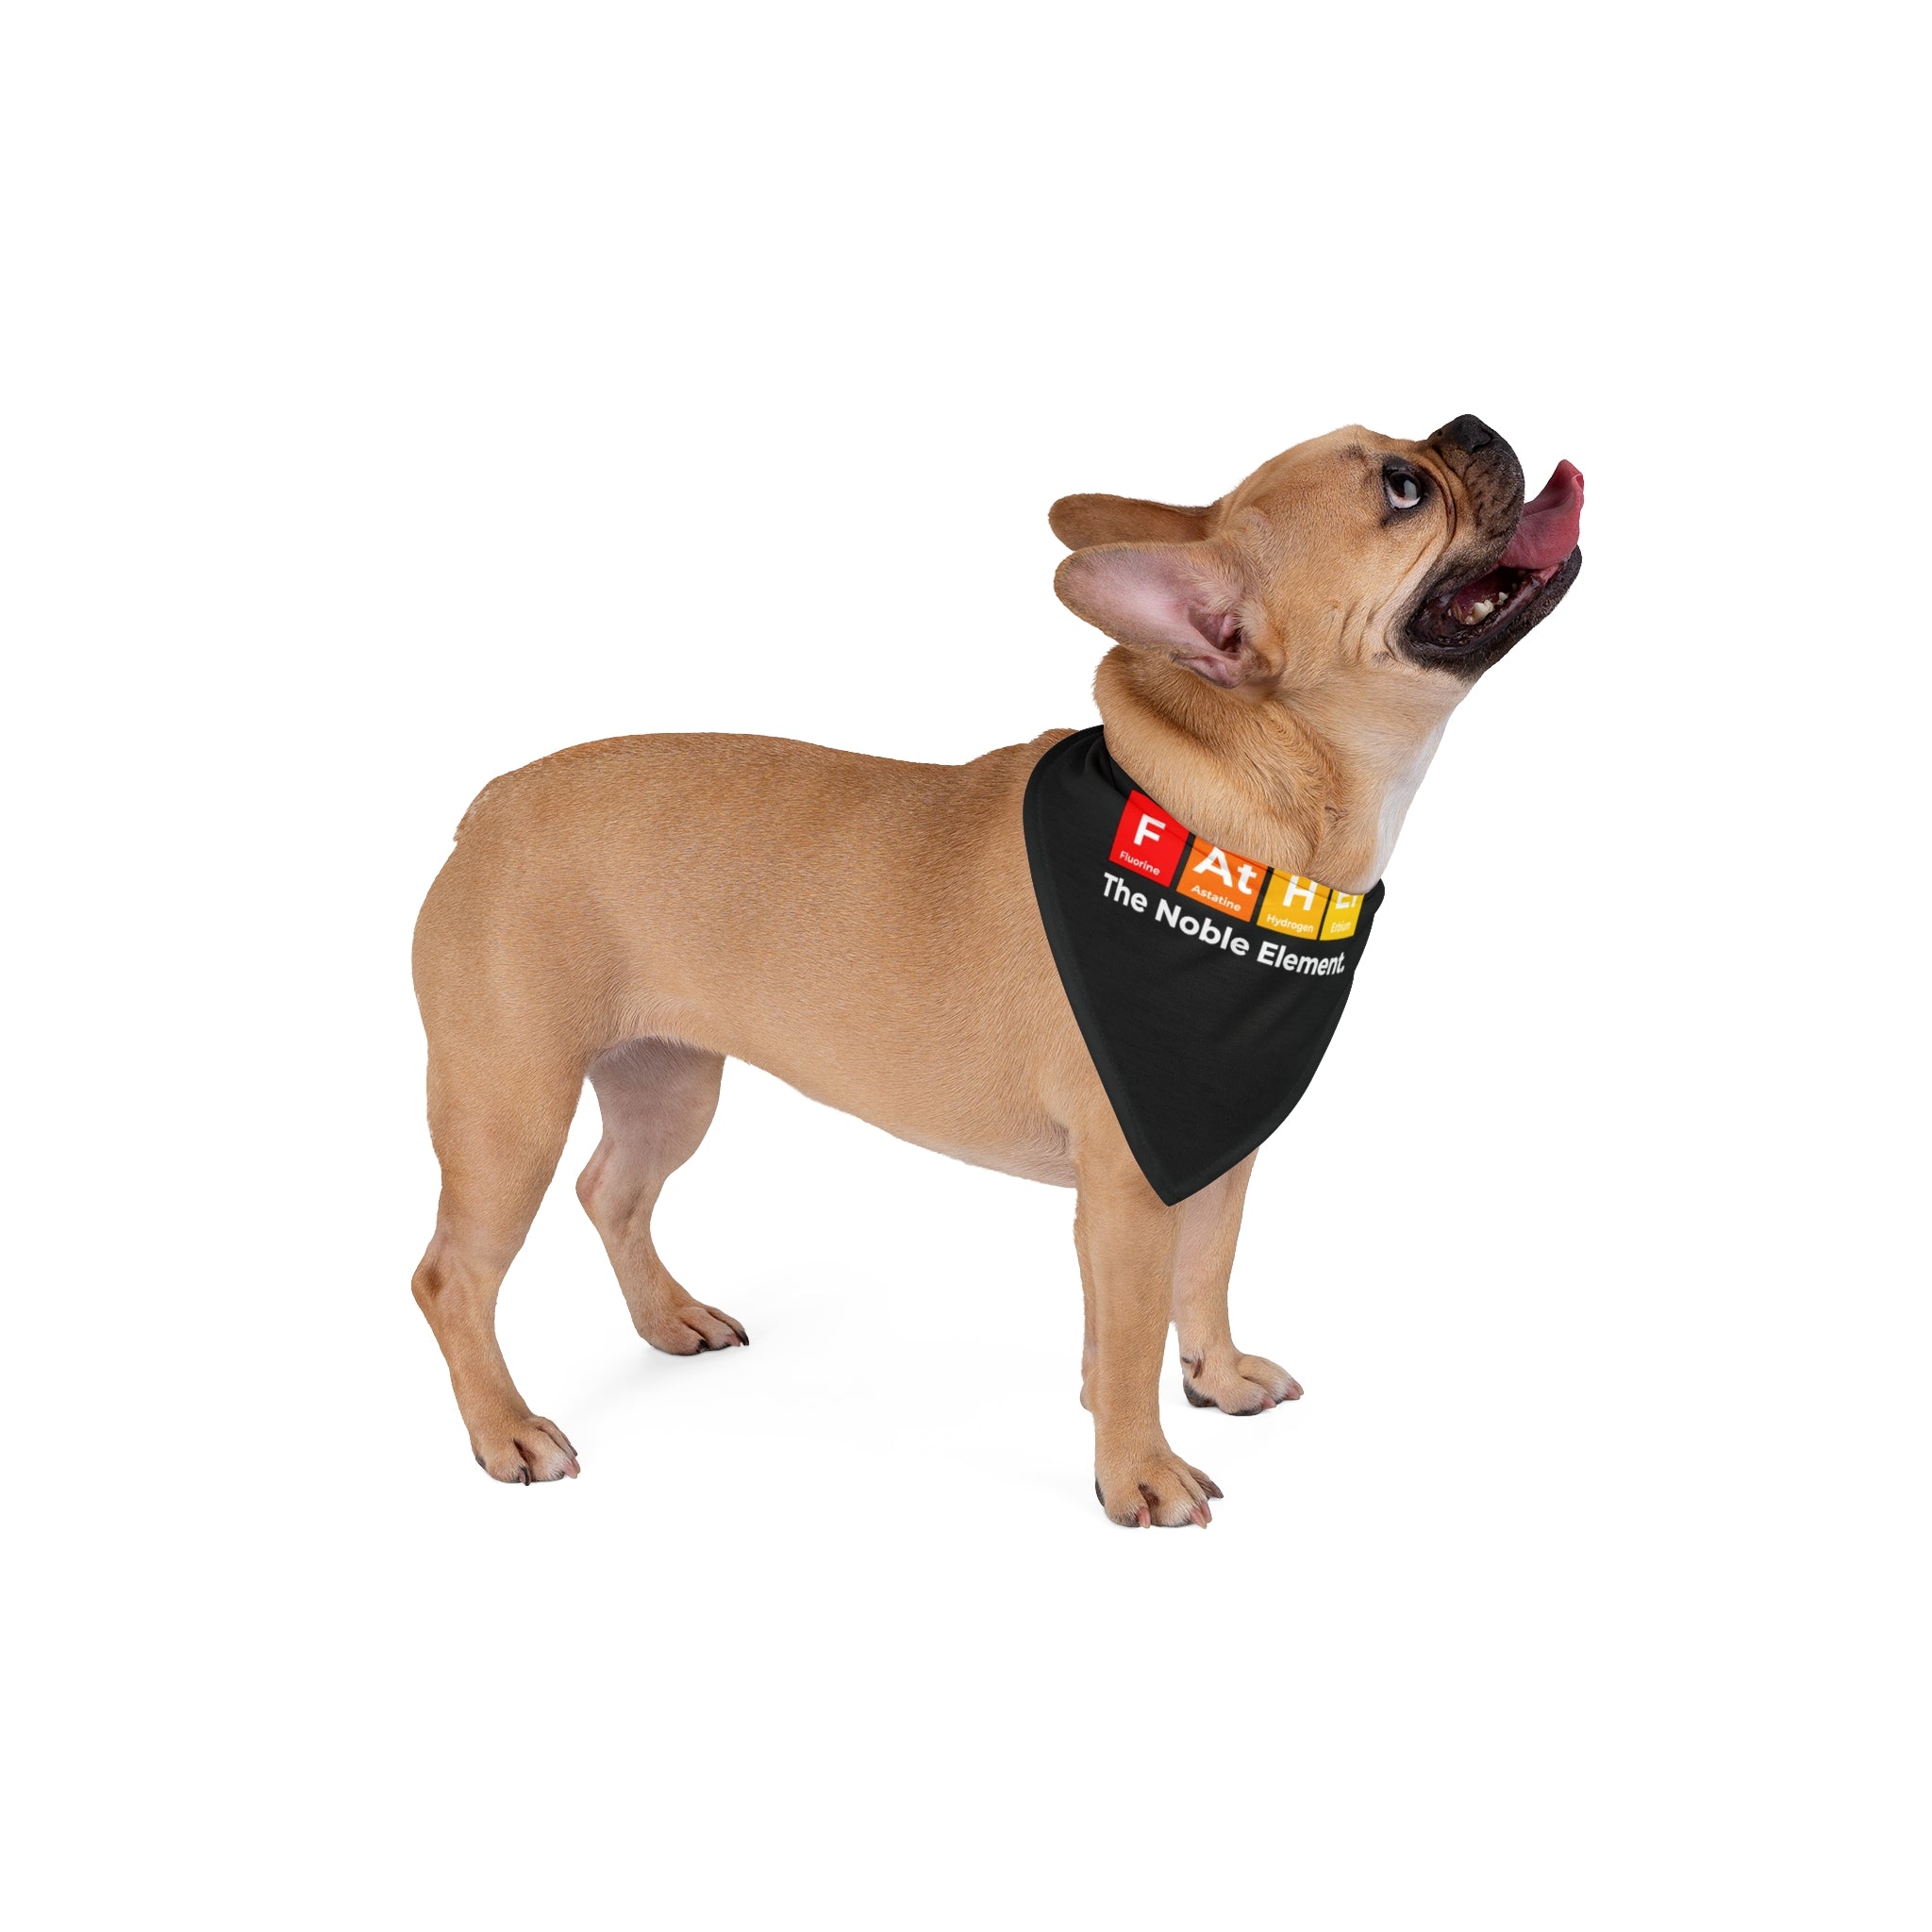 A light brown French Bulldog, wearing a black Father Graphic - Pet Bandana with colorful blocks spelling "Fart" and "The Noble Element" printed below, looks upward with its tongue out. This pet-friendly design is perfect for any Doggo Dad.